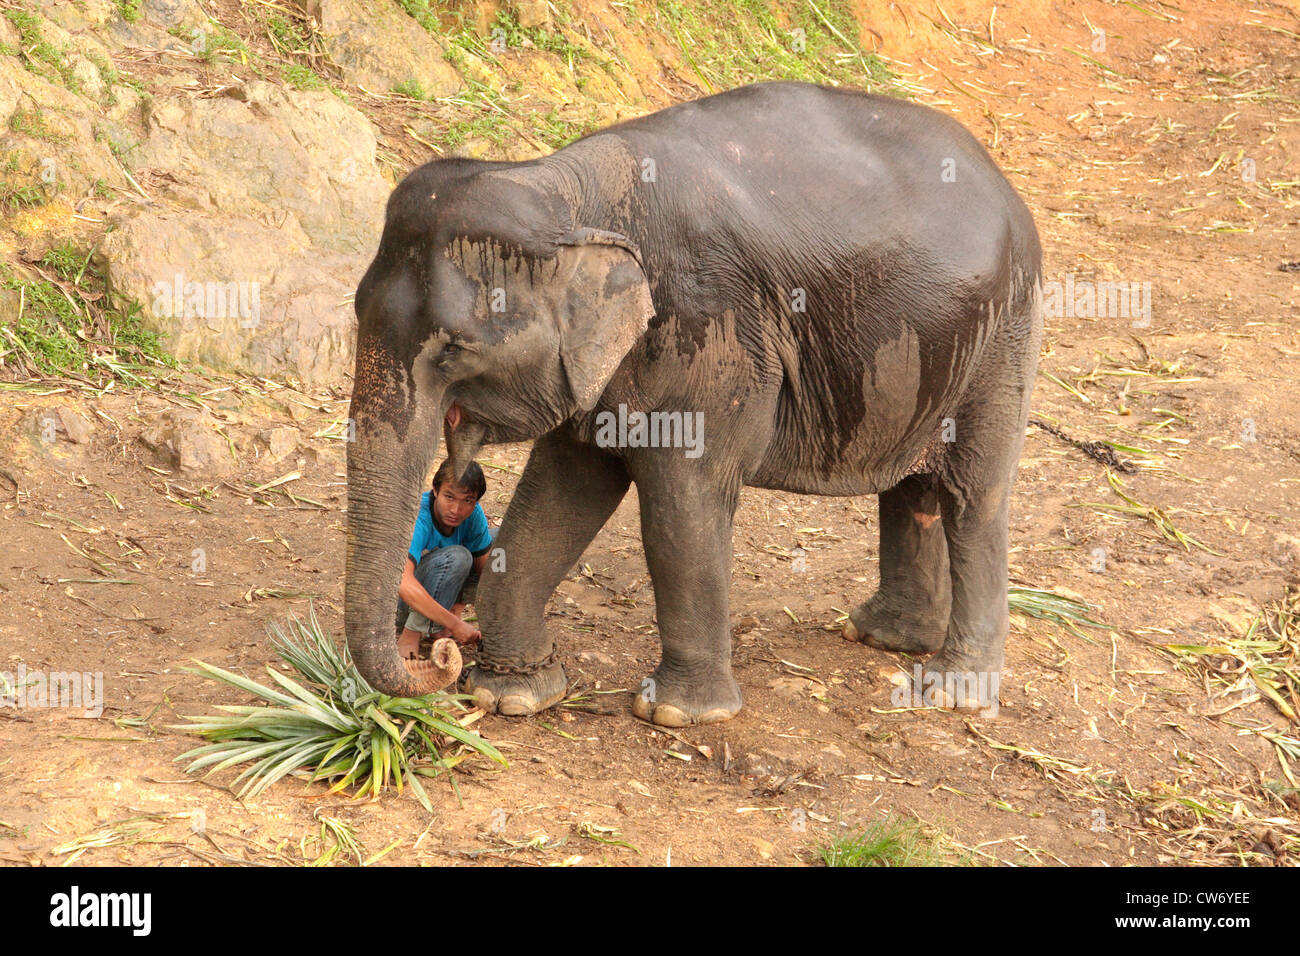 Indian elephant (Elephas maximus indicus, Elephas maximus bengalensis), working elephant is chained up in the evening, Thailand, Phuket Stock Photo